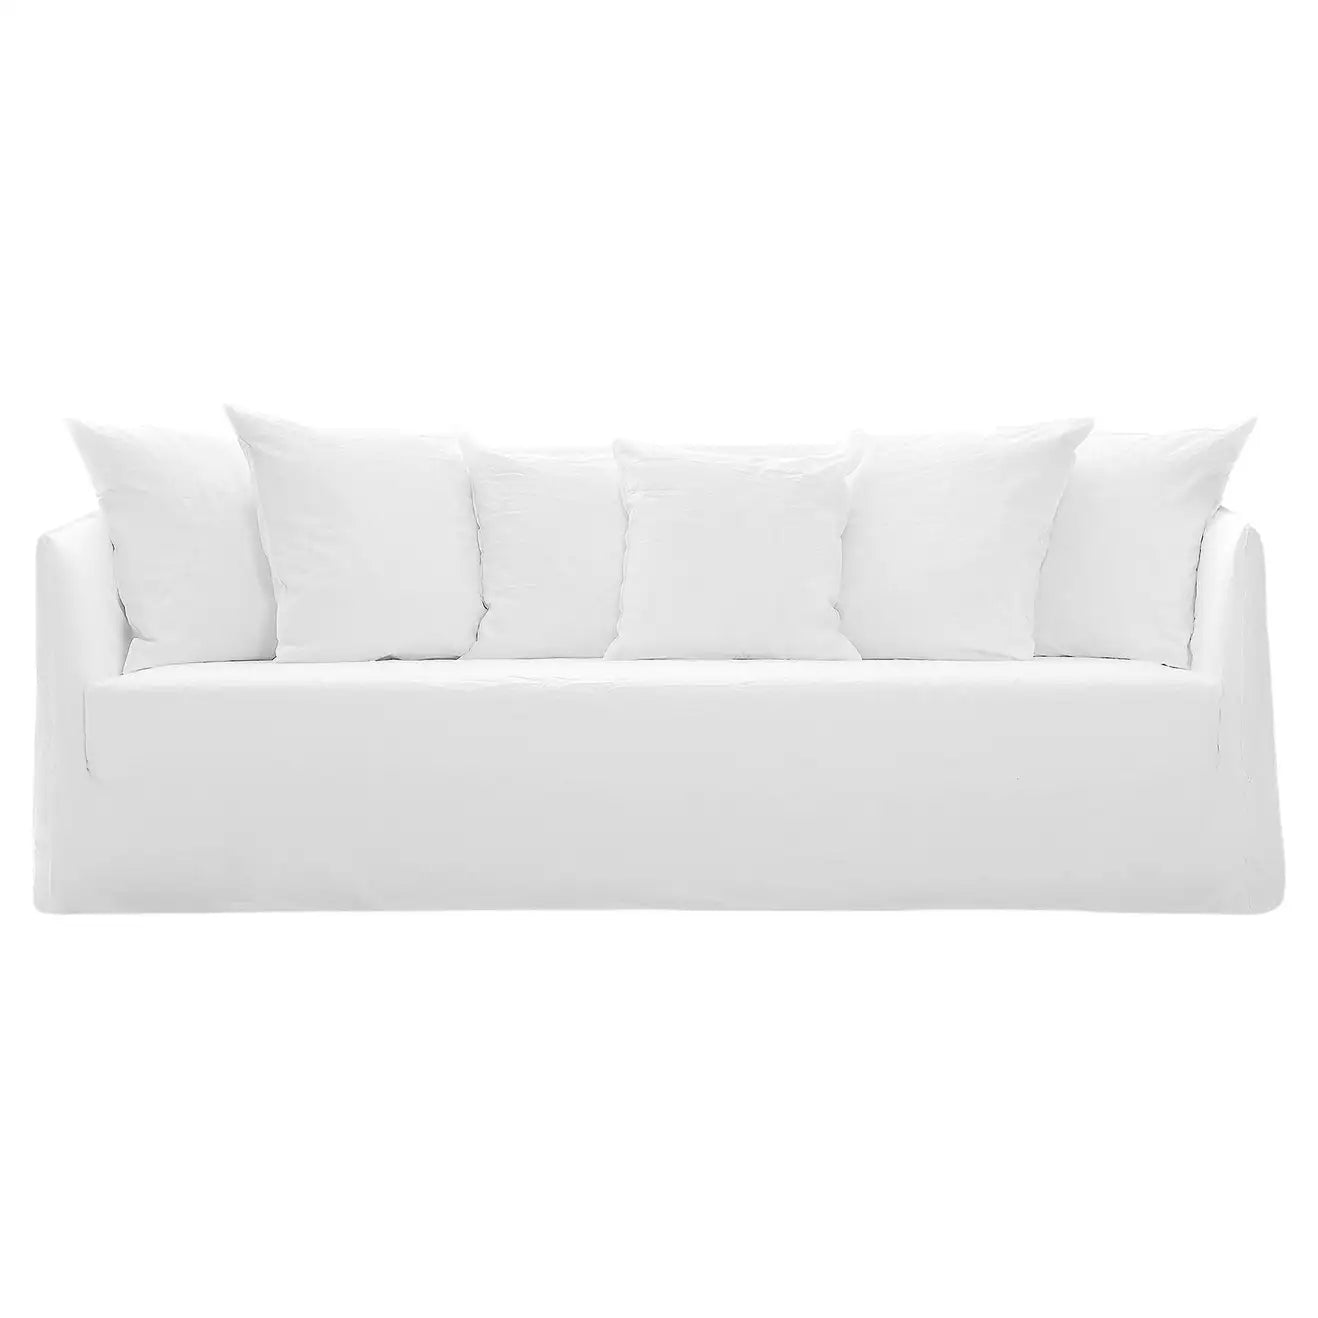 Gervasoni Ghost 12 Sofa in White Linen Upholstery by Paola Navone $6,000.00